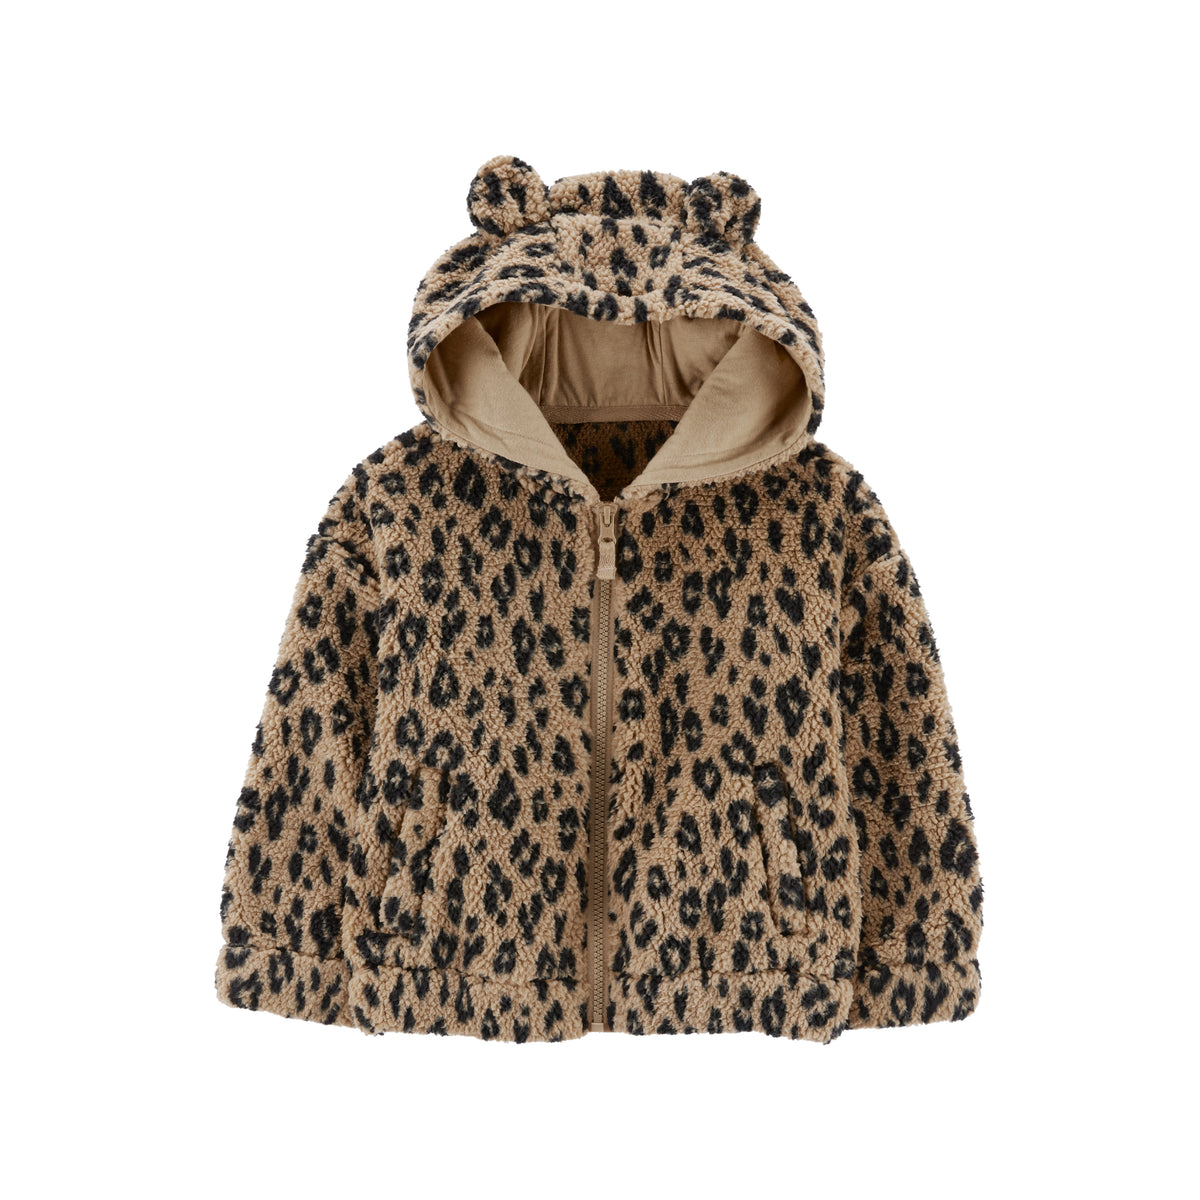 Carter's cool girl sexy leopard print jacket (2T-5T)